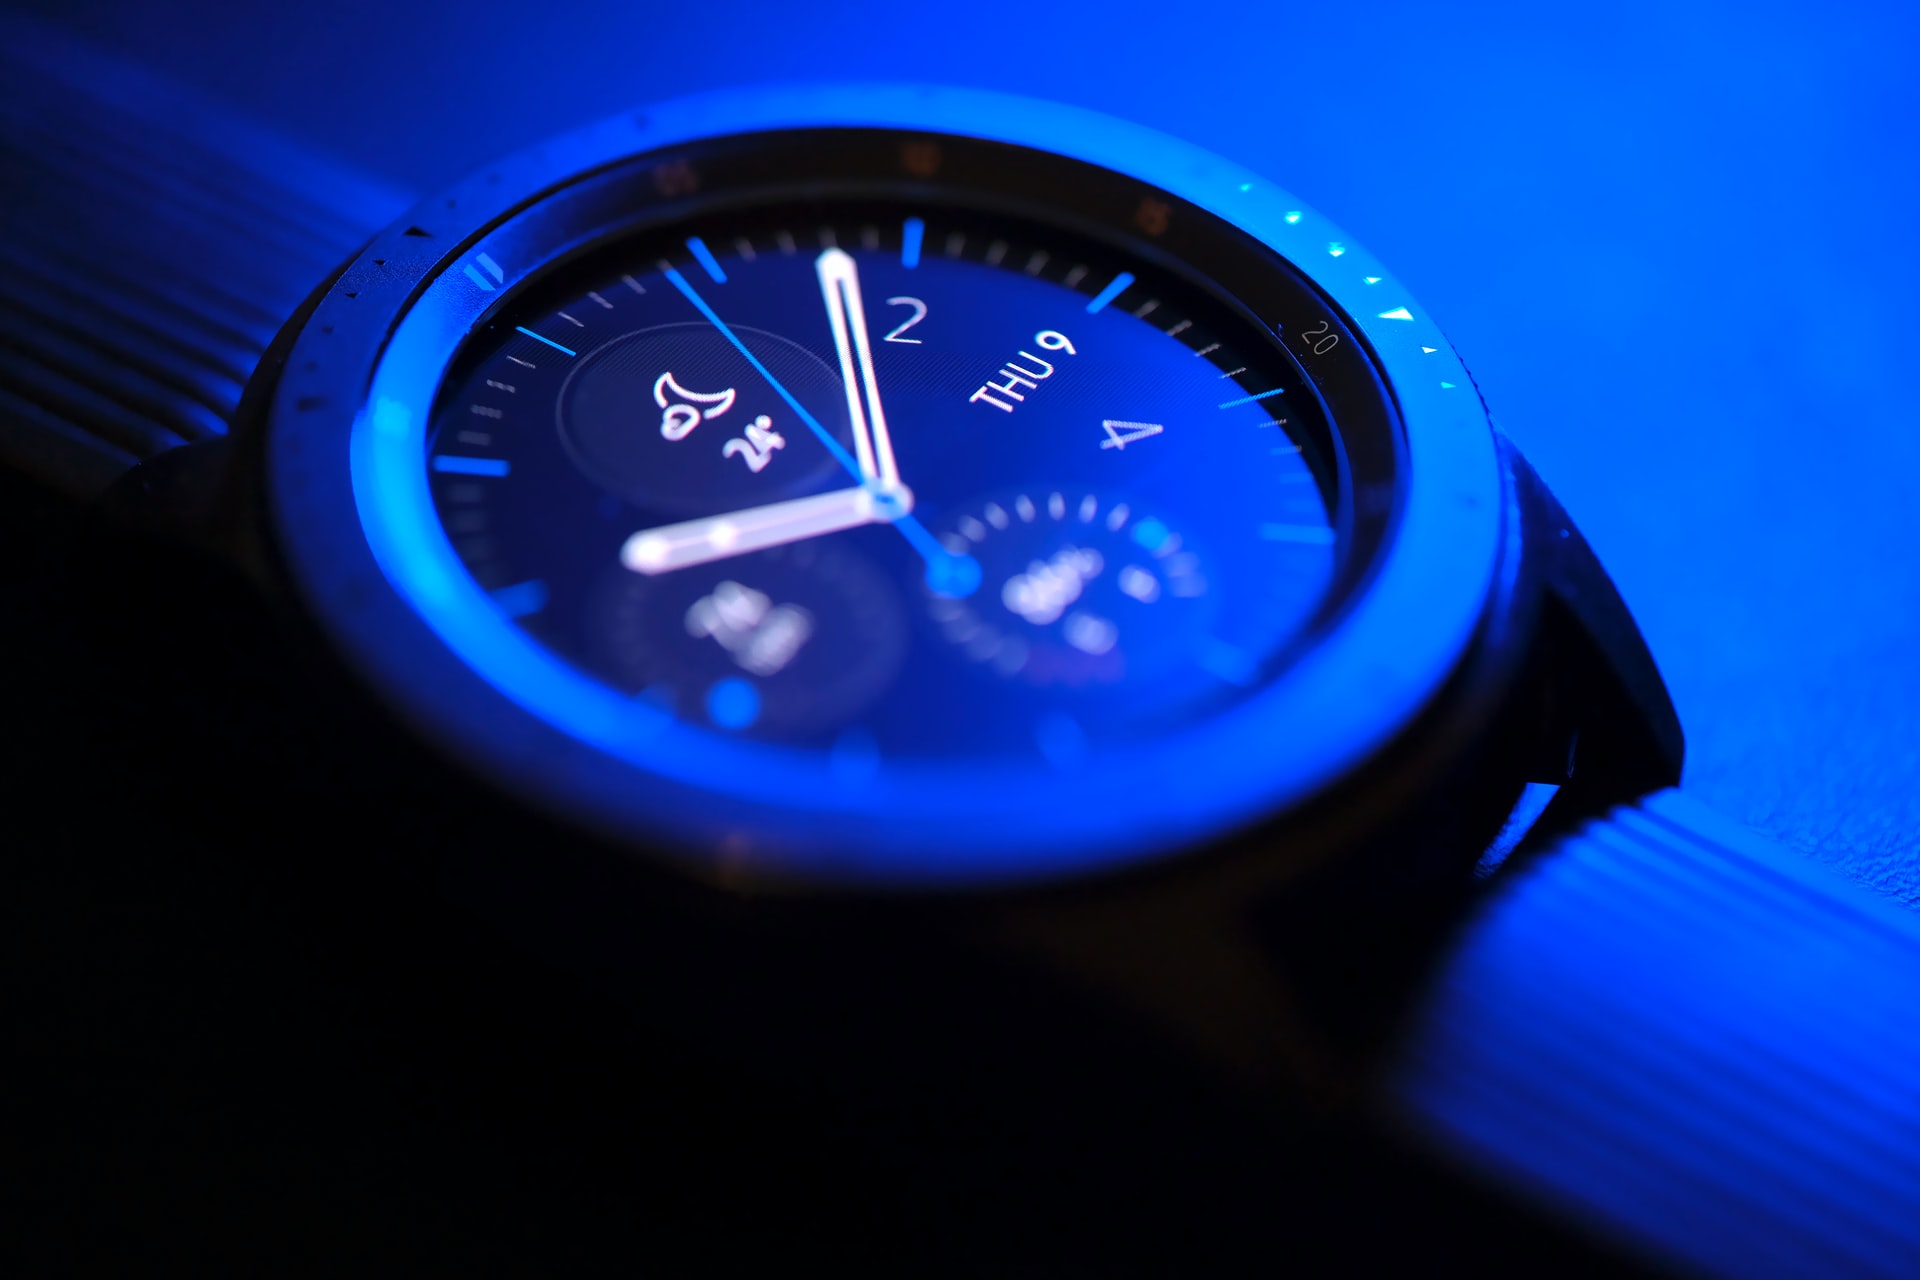 Refurbished Samsung Galaxy Watch 3 – Excellence at a Bargain!